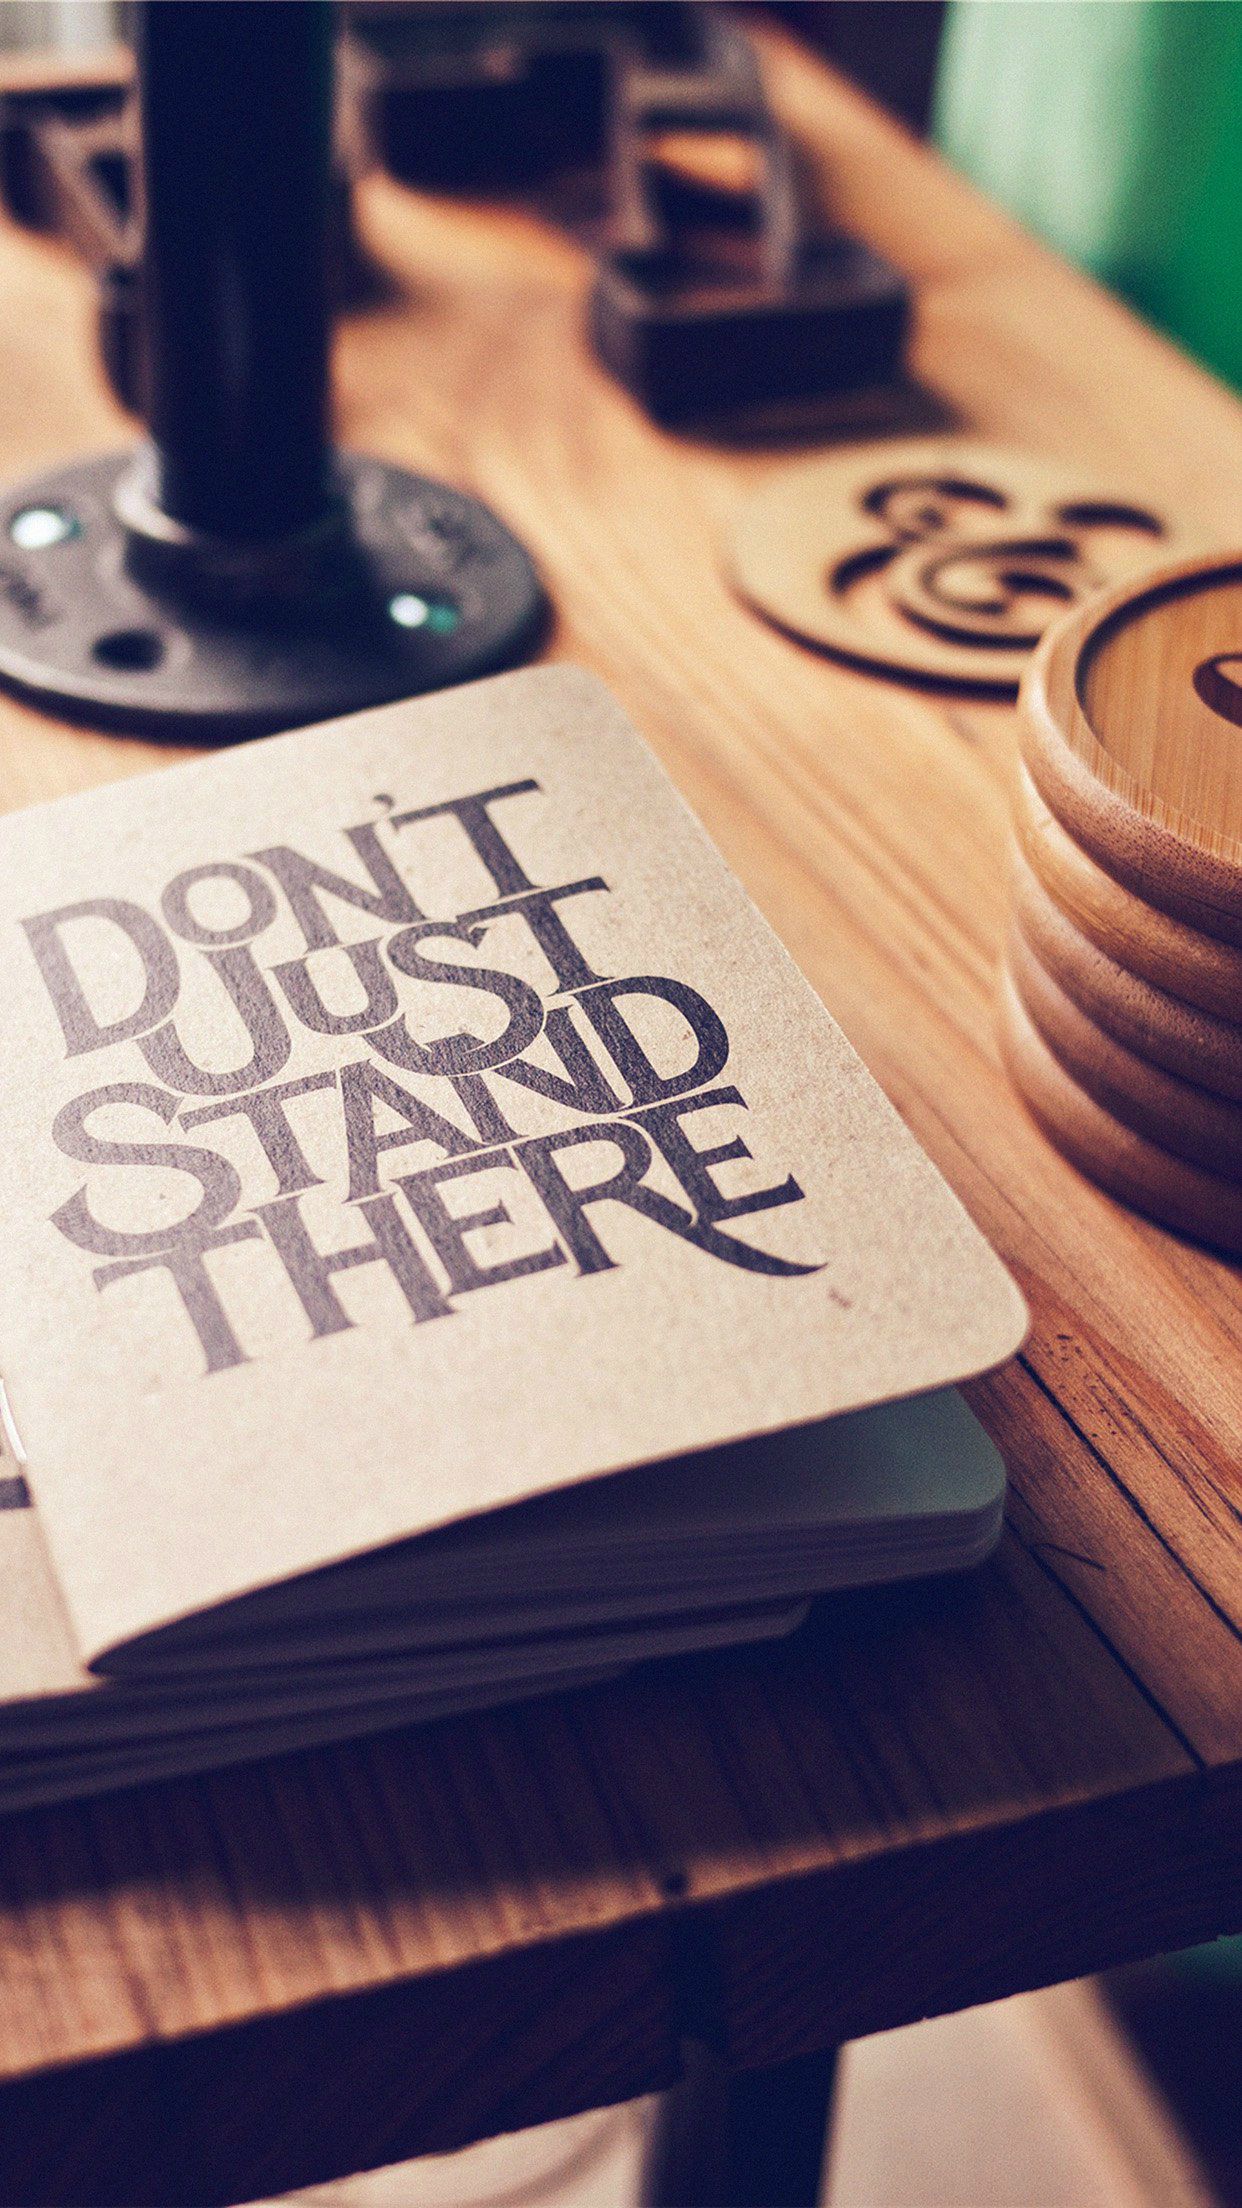 Dont Just Stand There Motto iPhone 8 Wallpaper Free Download